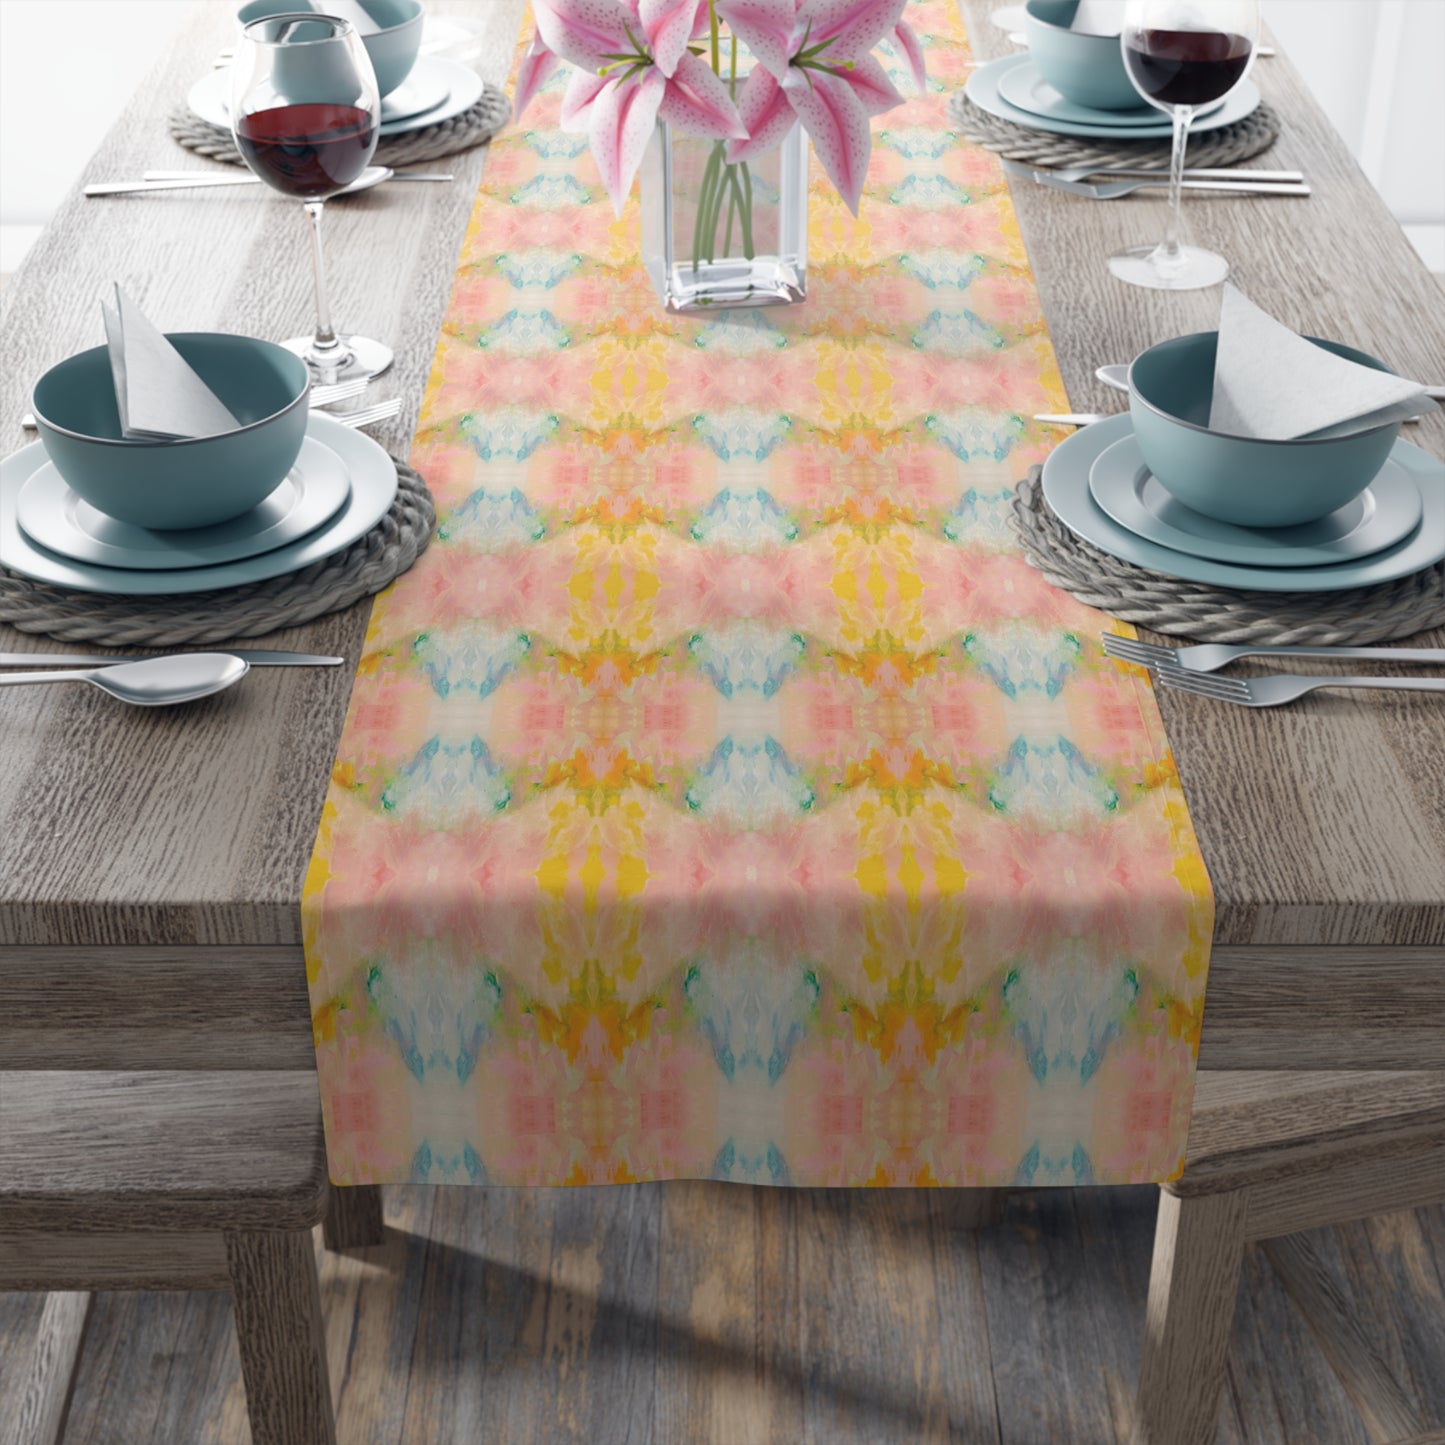 Cotton Candy Table Runner